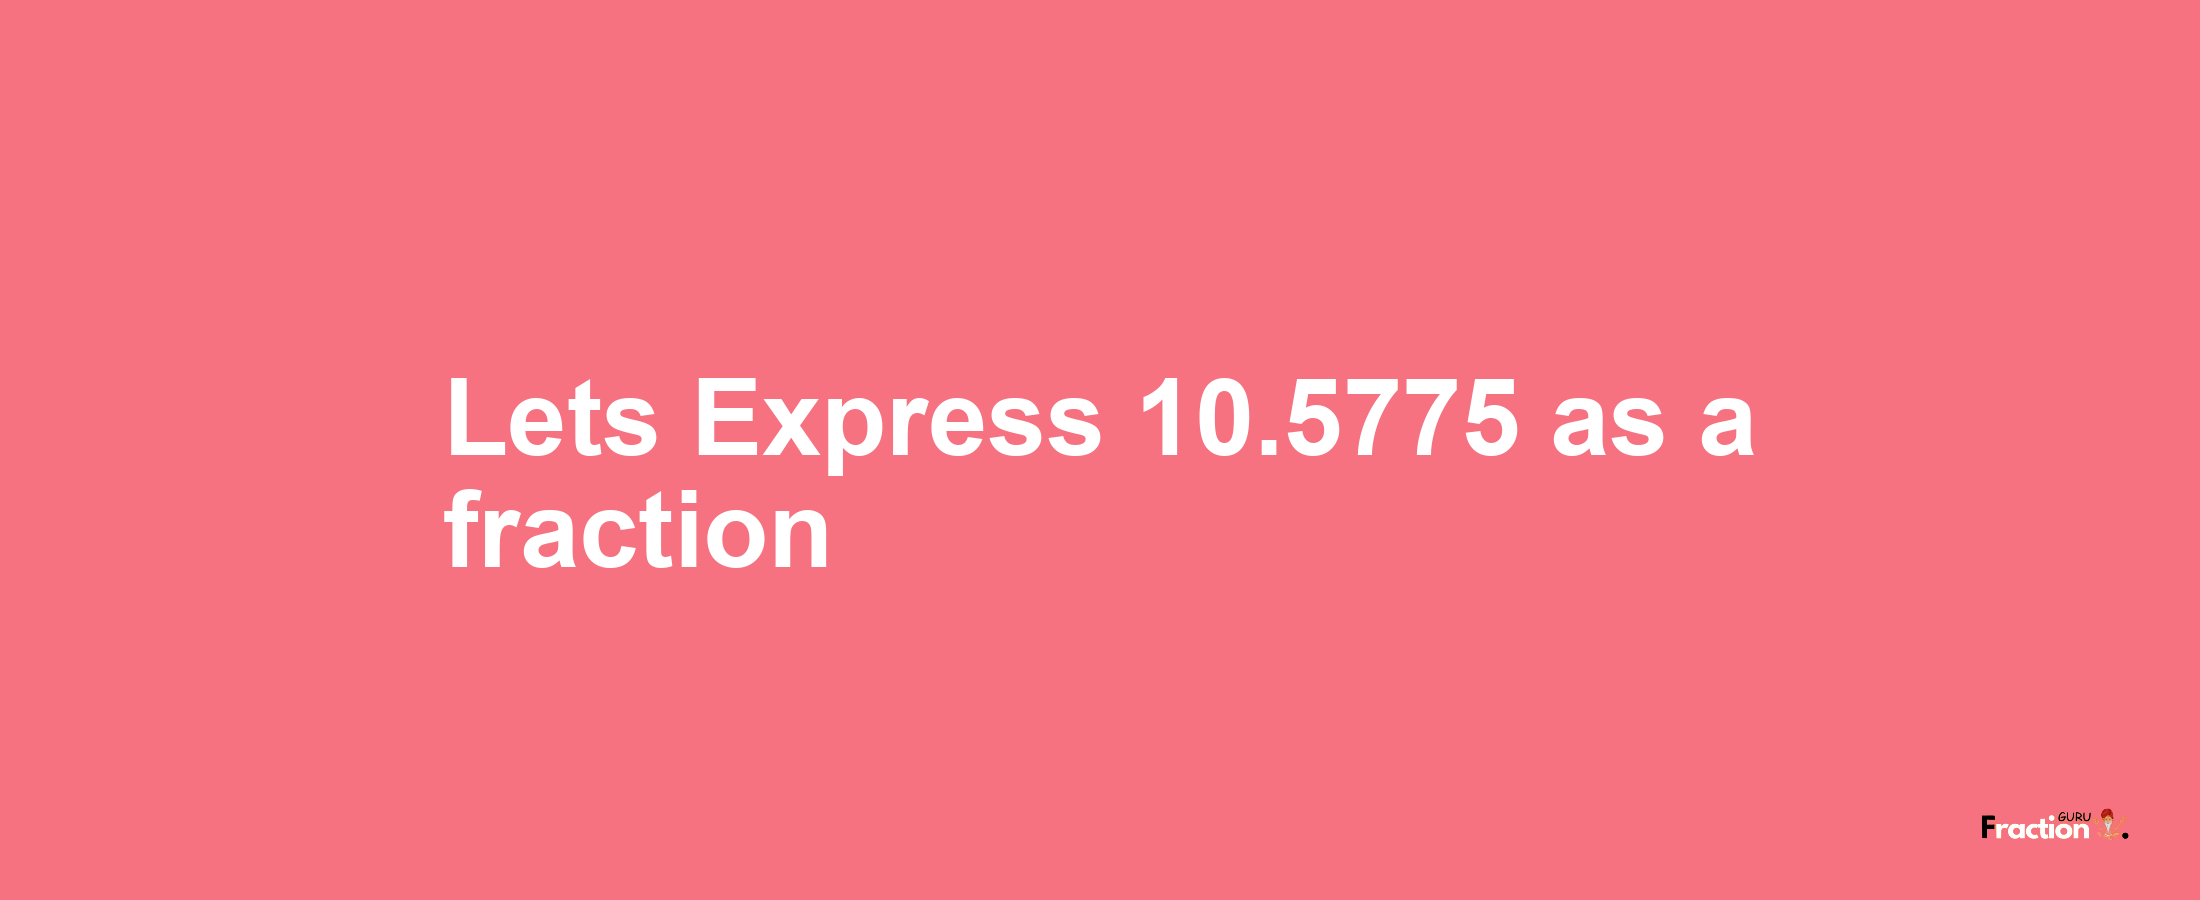 Lets Express 10.5775 as afraction